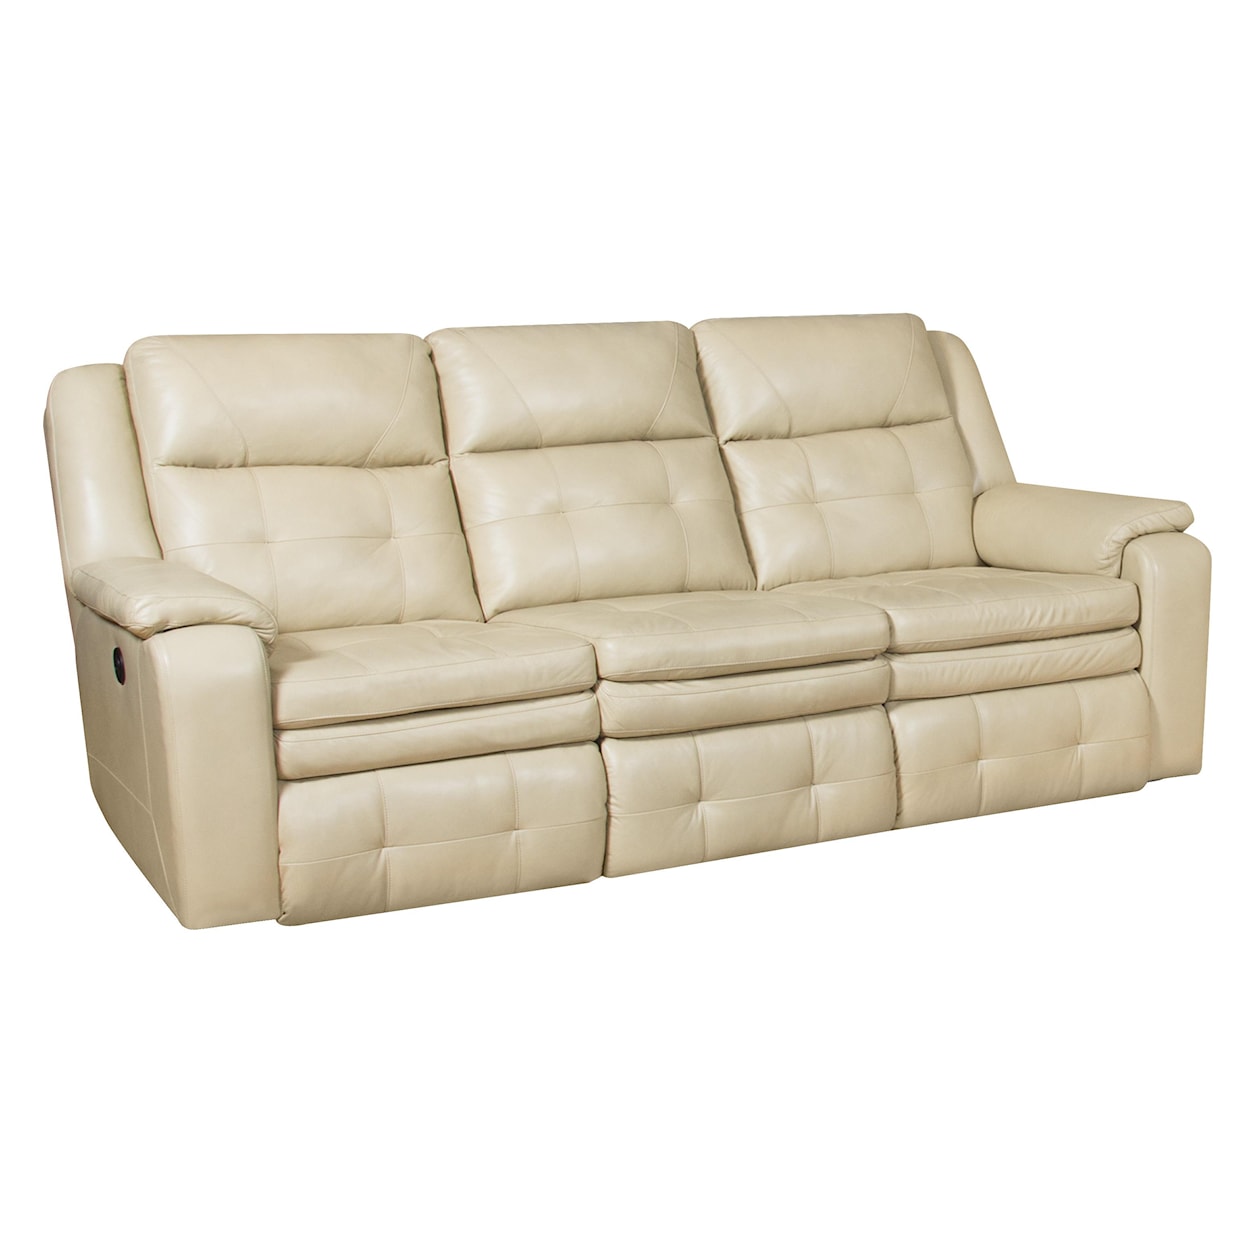 Southern Motion Inspire Double Reclining Sofa